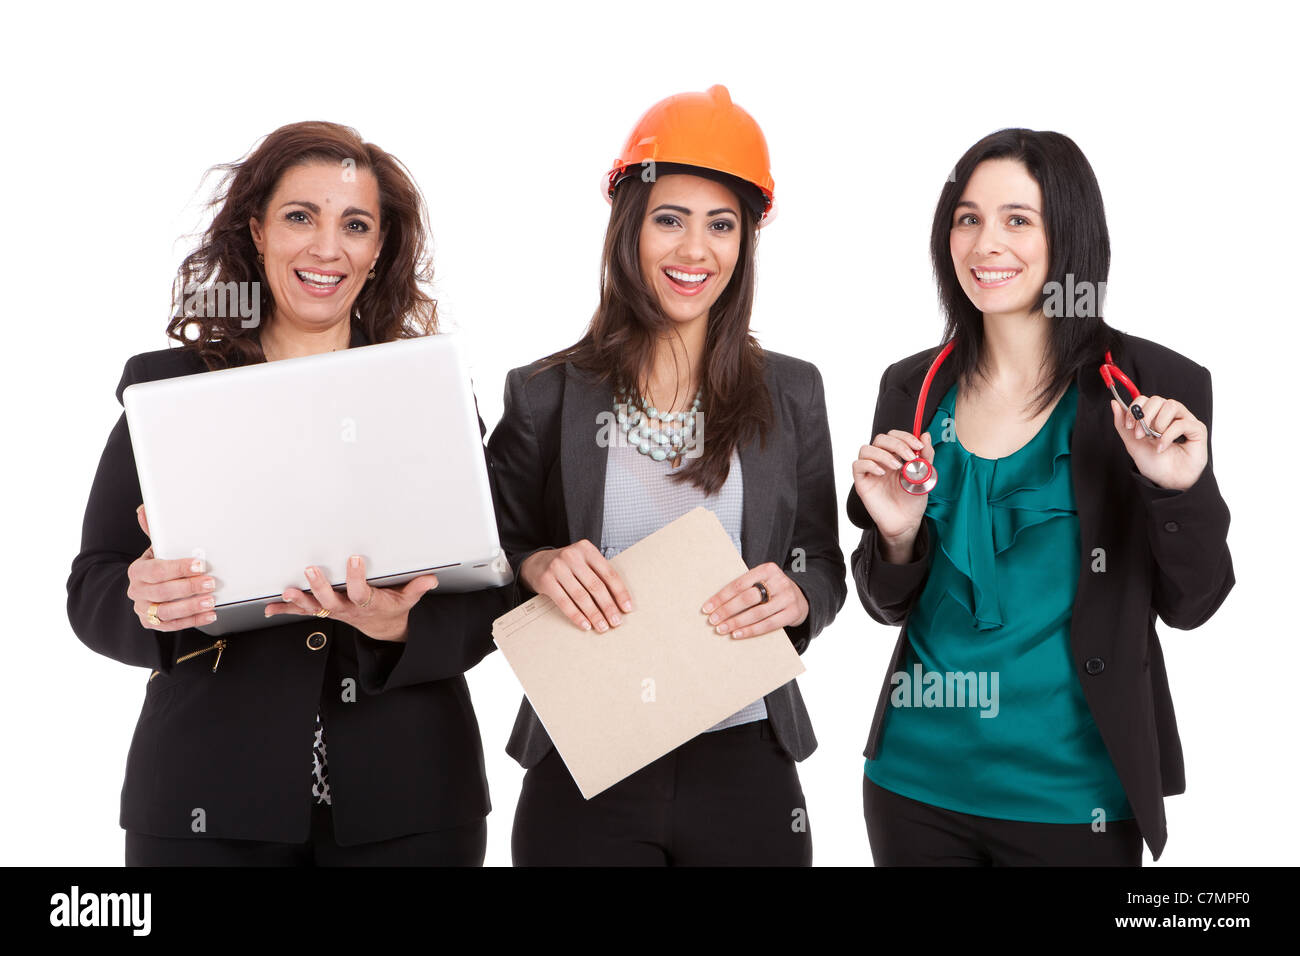 Professional women in the workforce Stock Photo